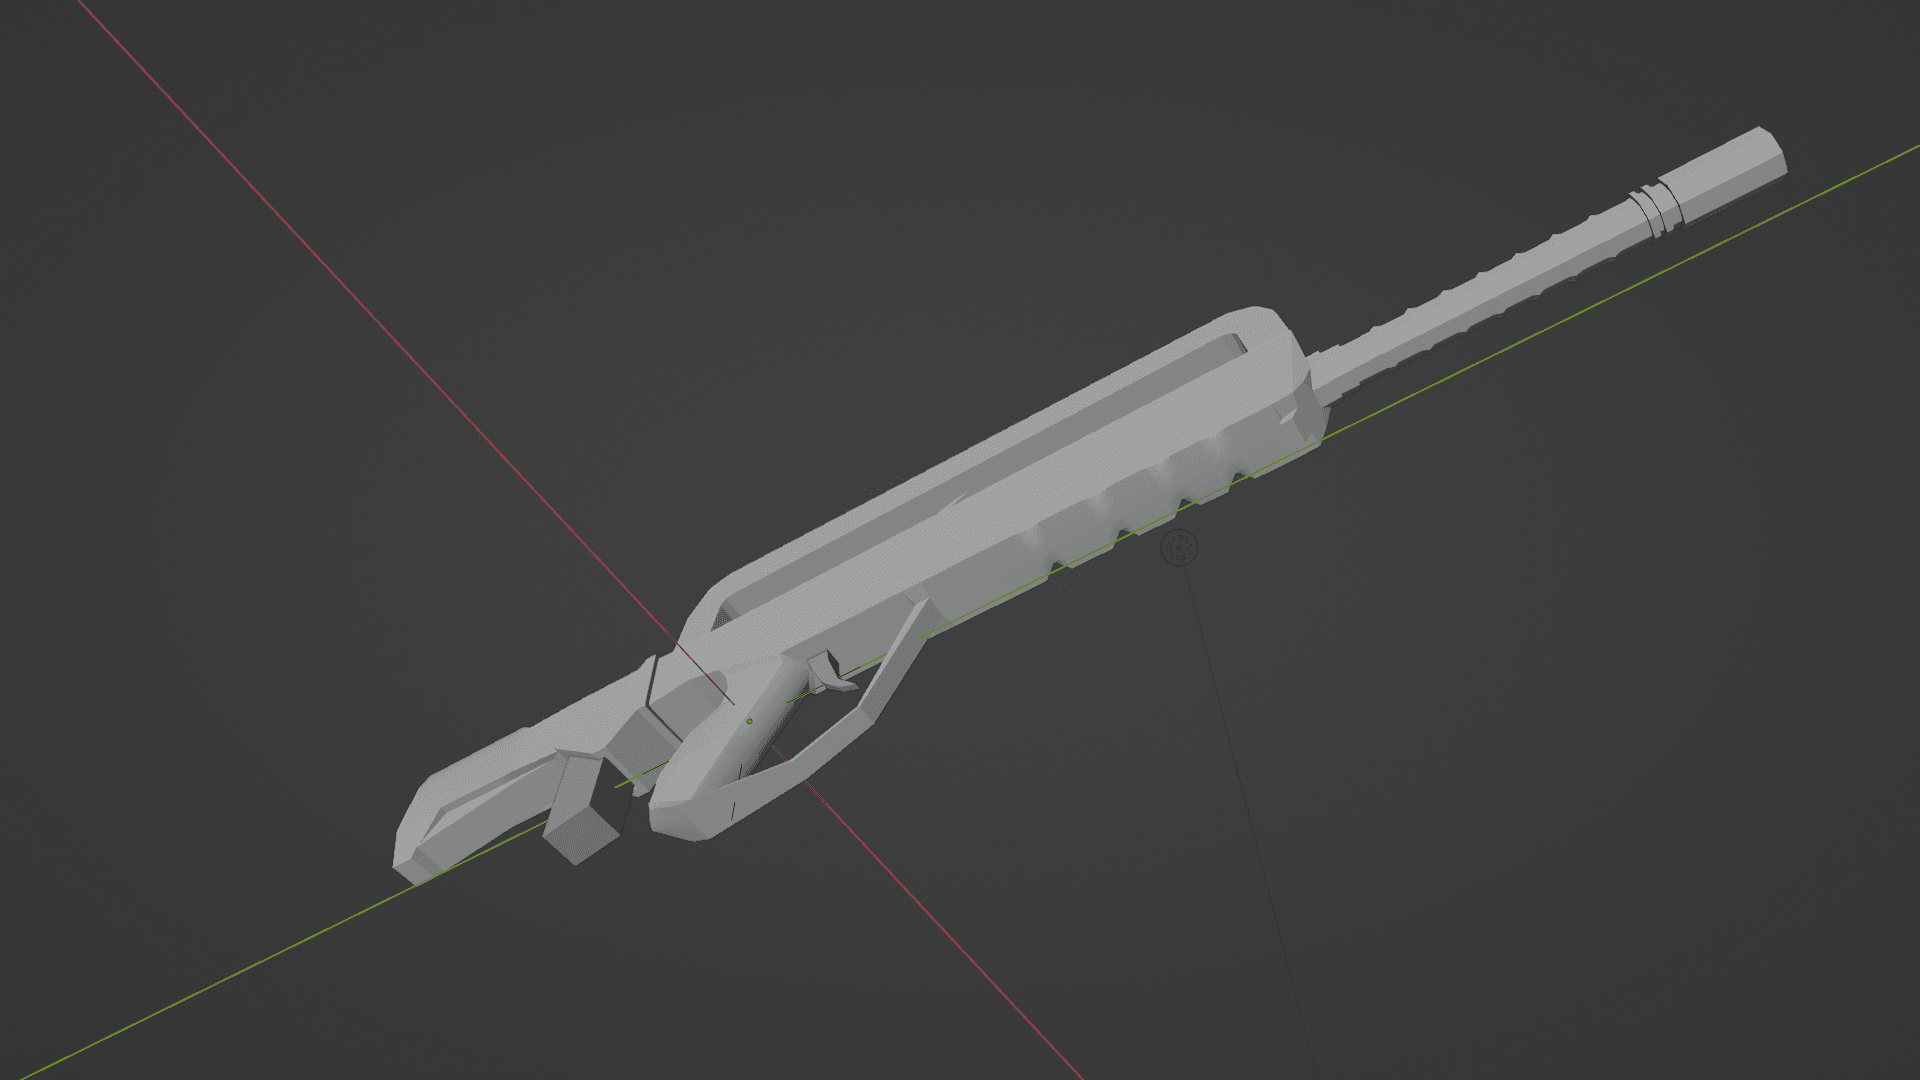 LOW POLY FAMAS for game asset or 3D Print. 3d model